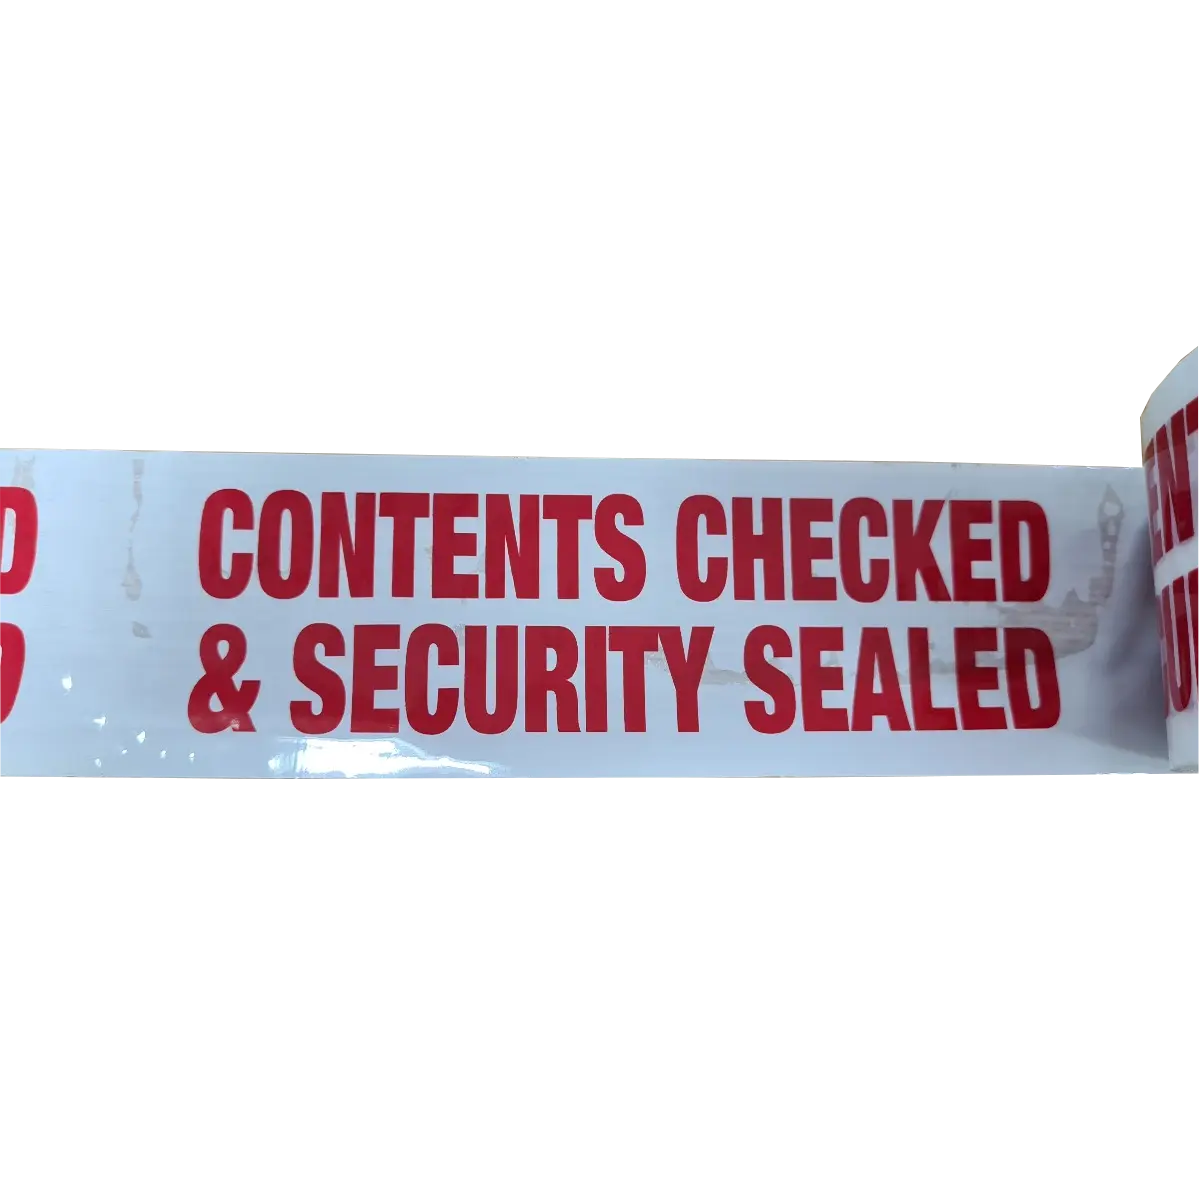 Contents Checked & Security Sealed Tape, Highly Visible & Identifiable